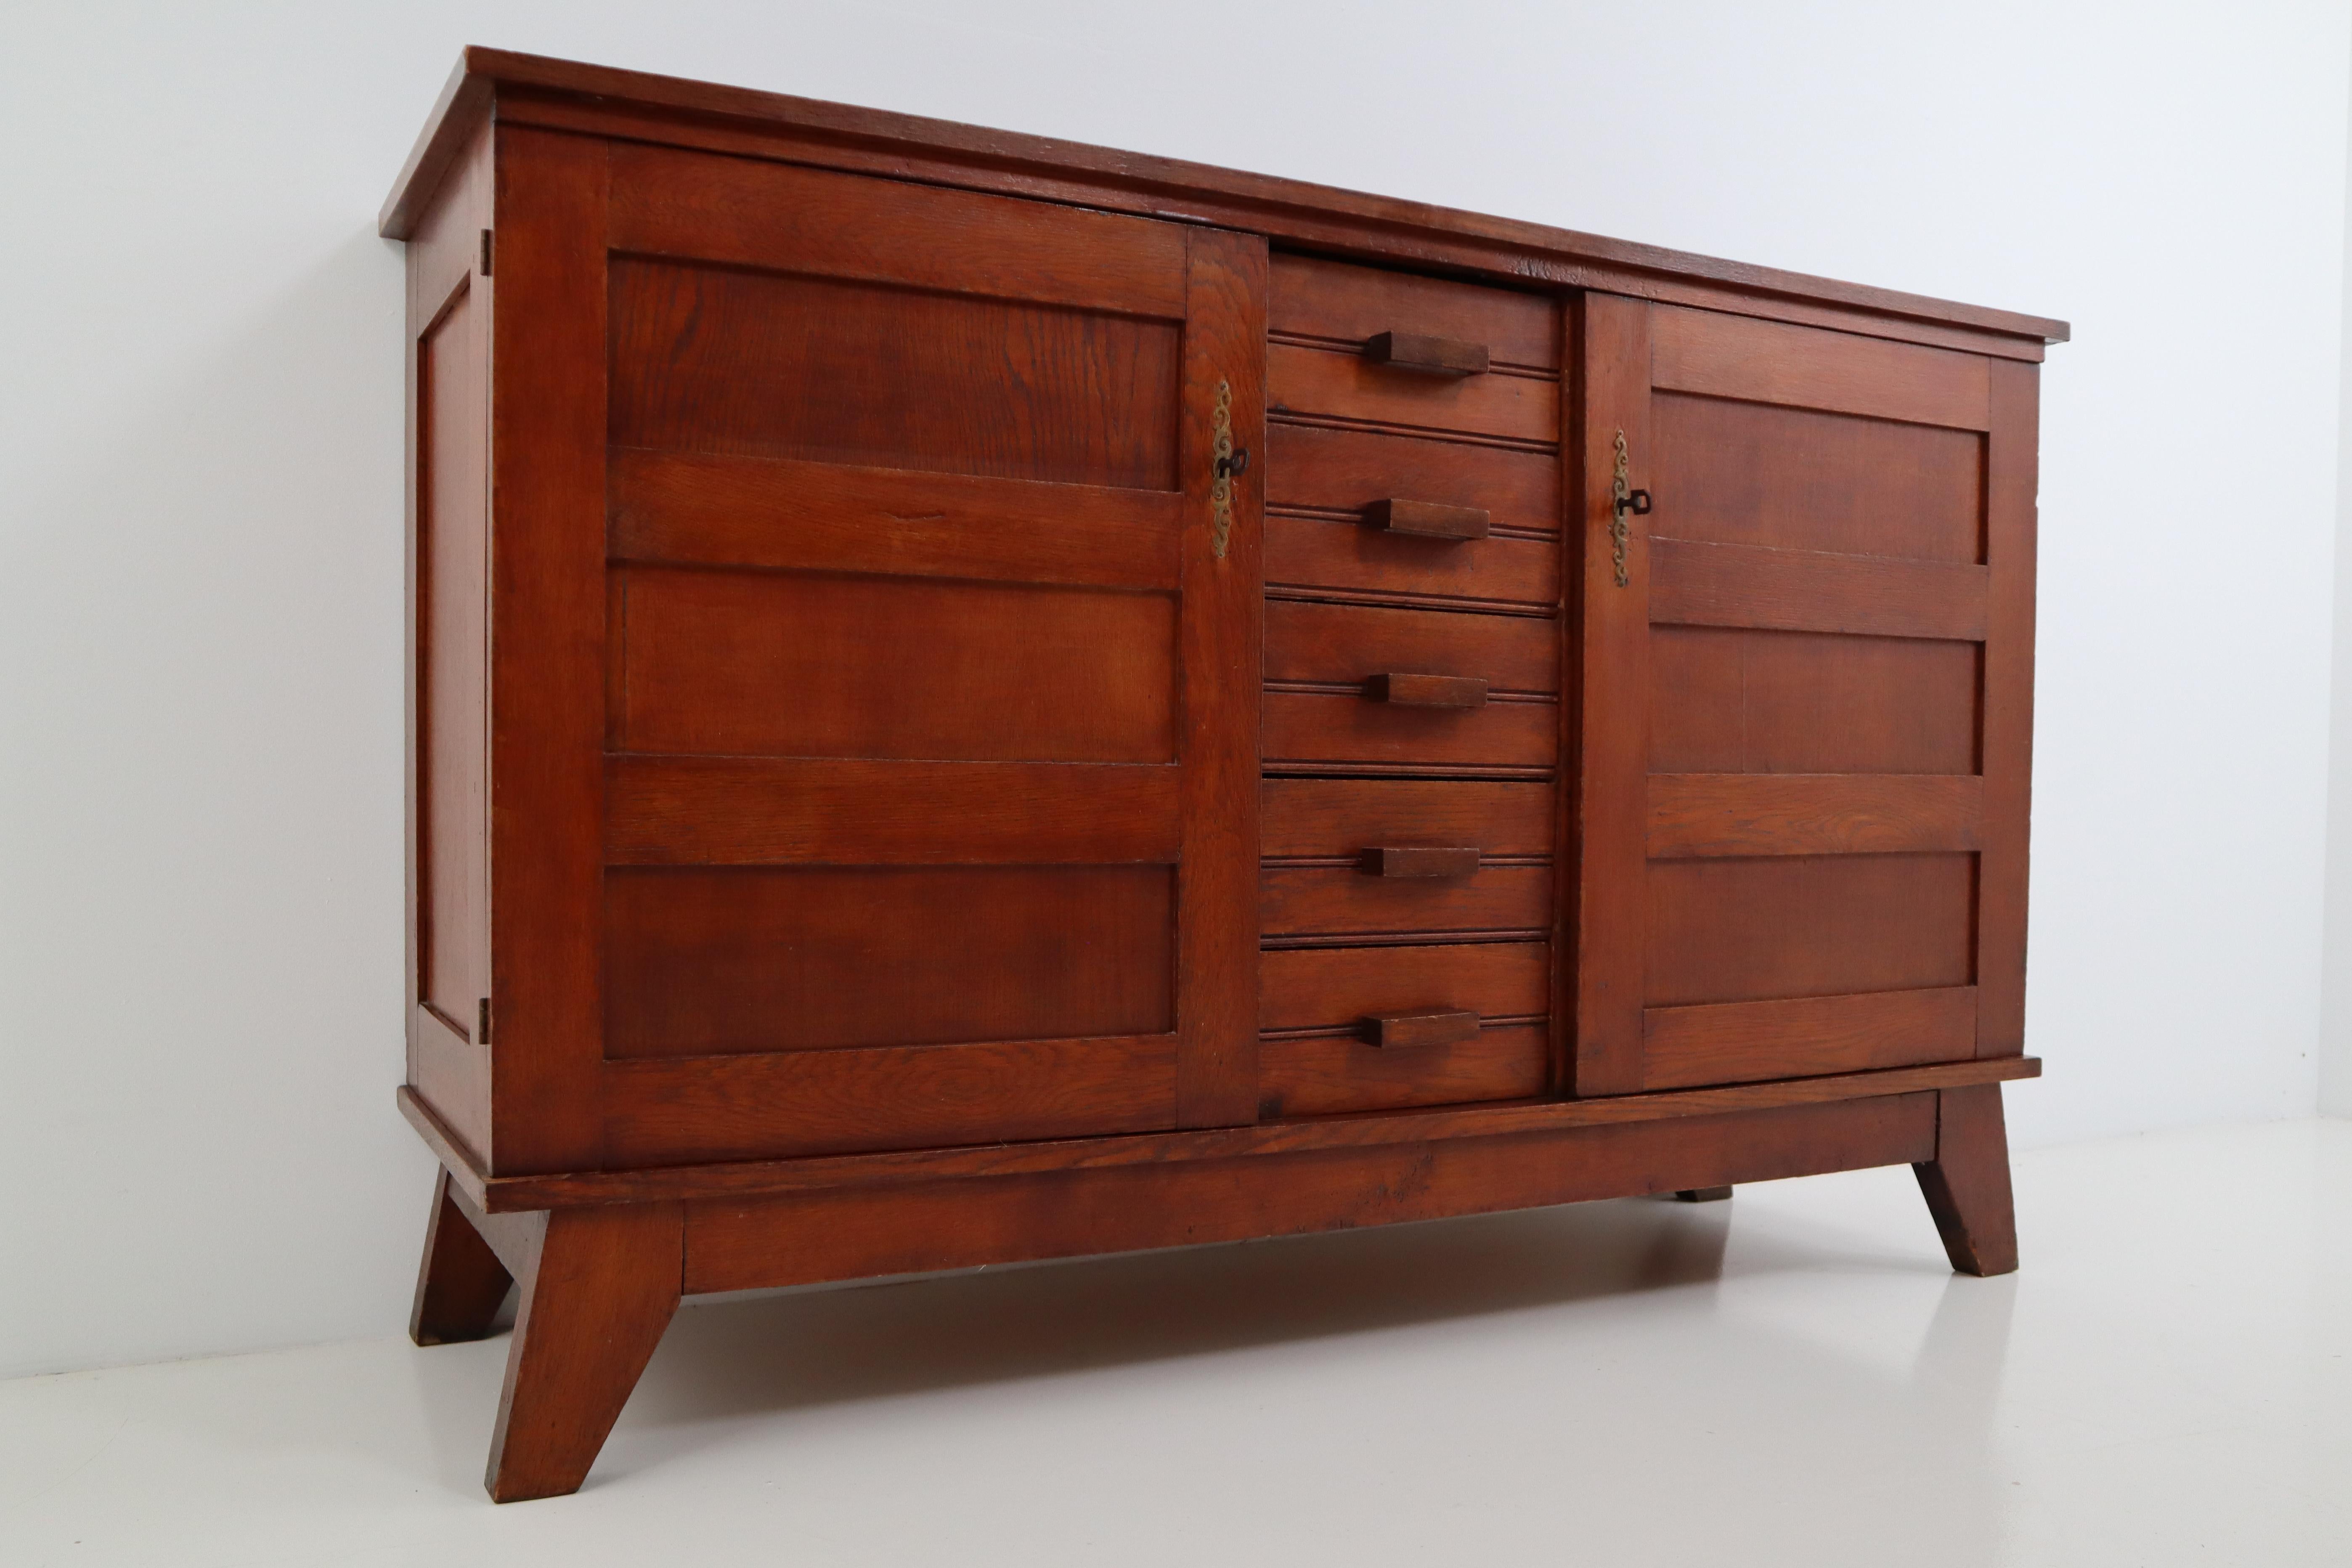 Published in 1944 and designed by René Gabriel, this sideboard dates back to the 1950s and is a typical example of so-called reconstruction furniture. Emergency product for the victims of the war, the design is simple and functional. It is made of